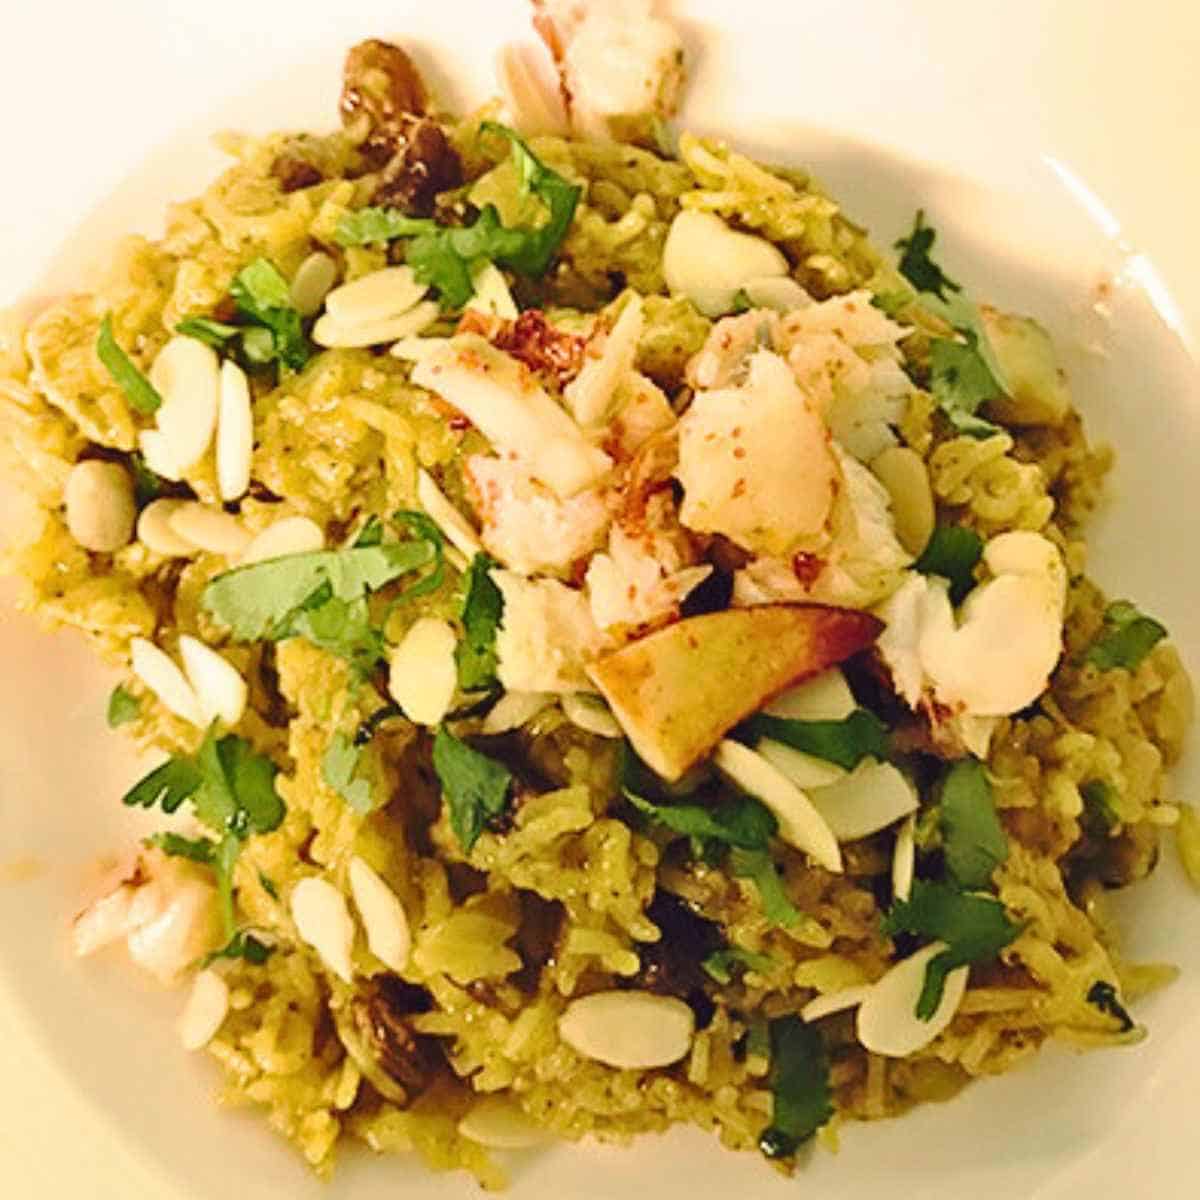 White bowl filled with a mix of green herbs, spices, chicken pieces and yellow rice.